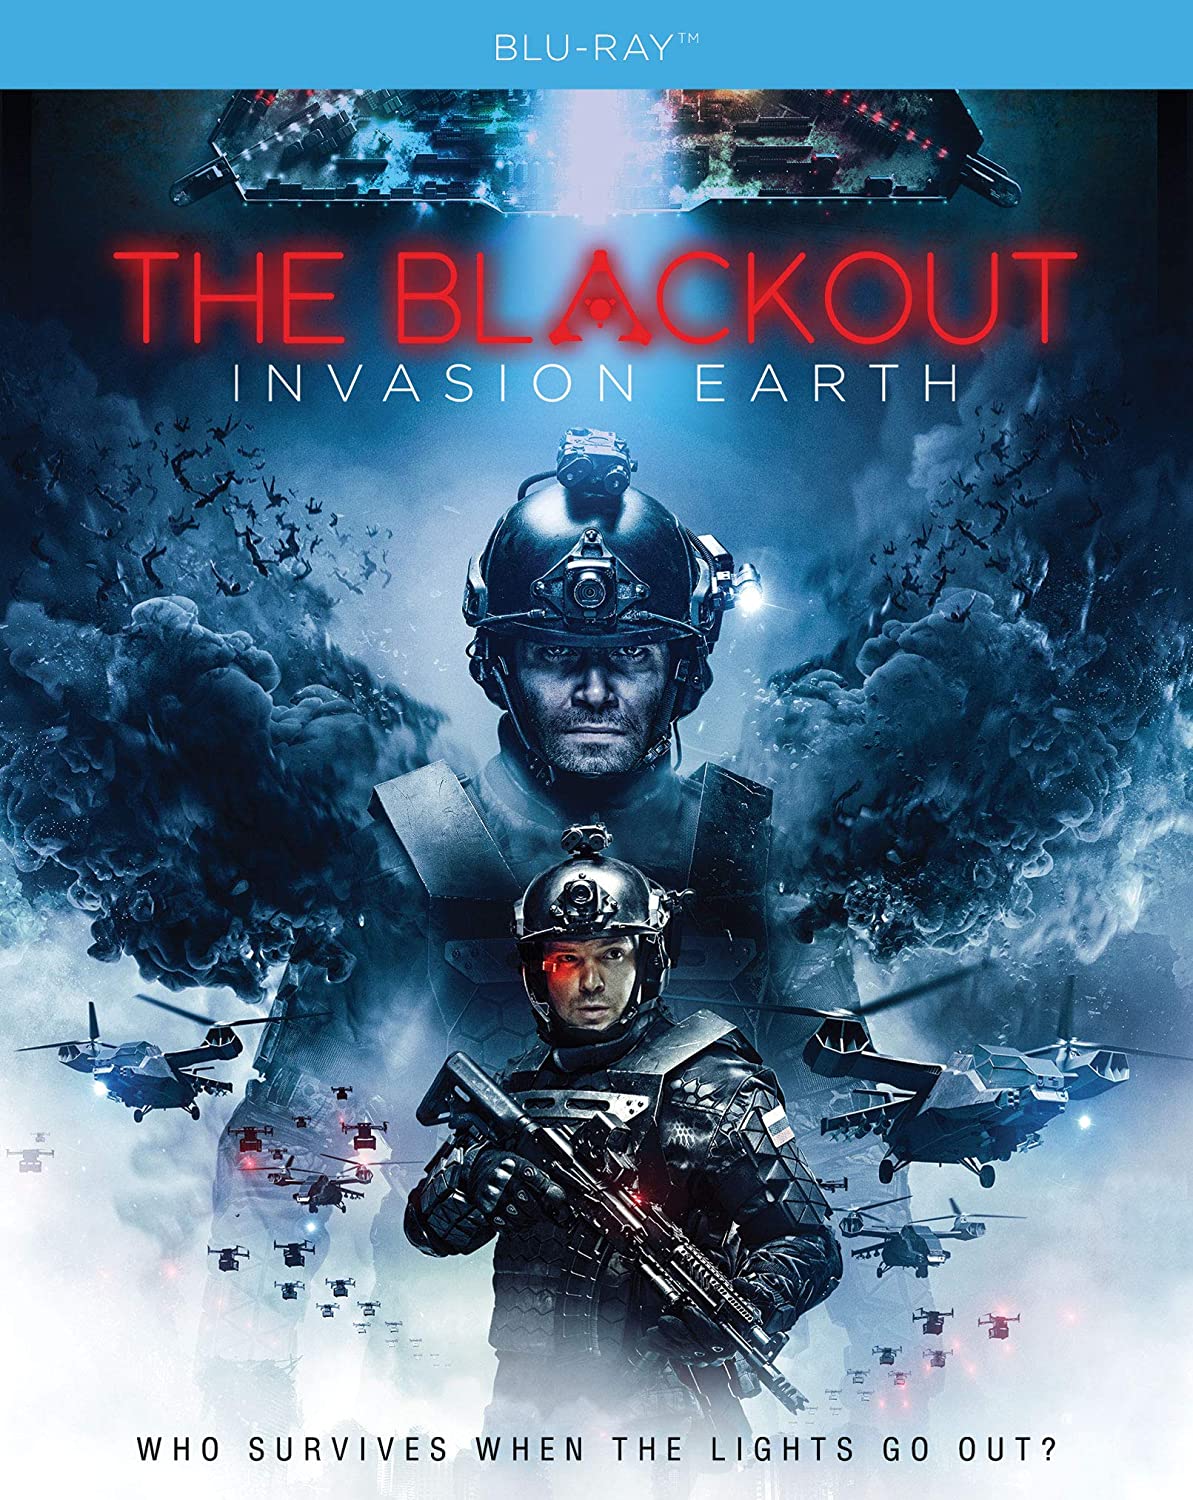 The Blackout: Invasion Earth Blu-Ray Blu-Ray